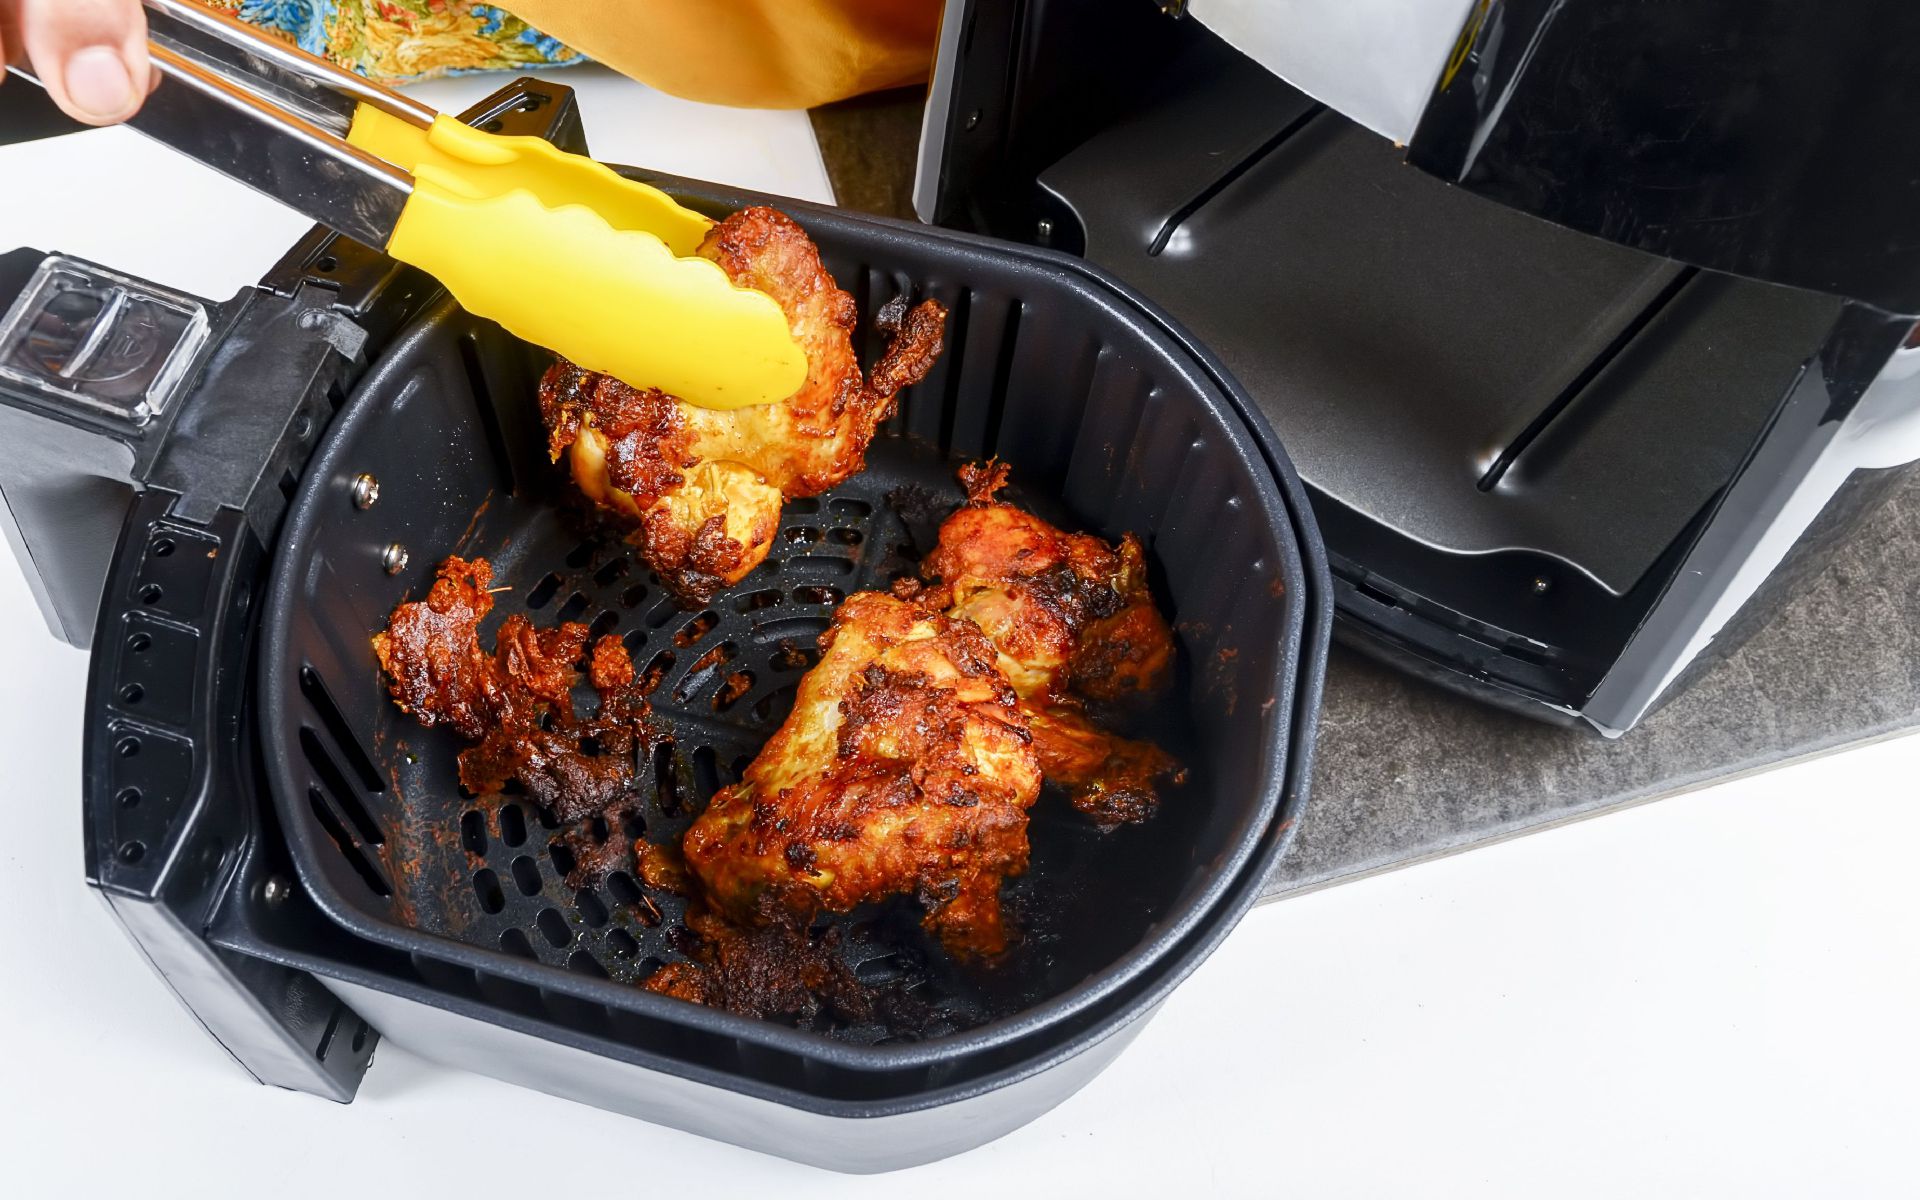 3 Amazing Benefits of Having an Air Fryer at Home